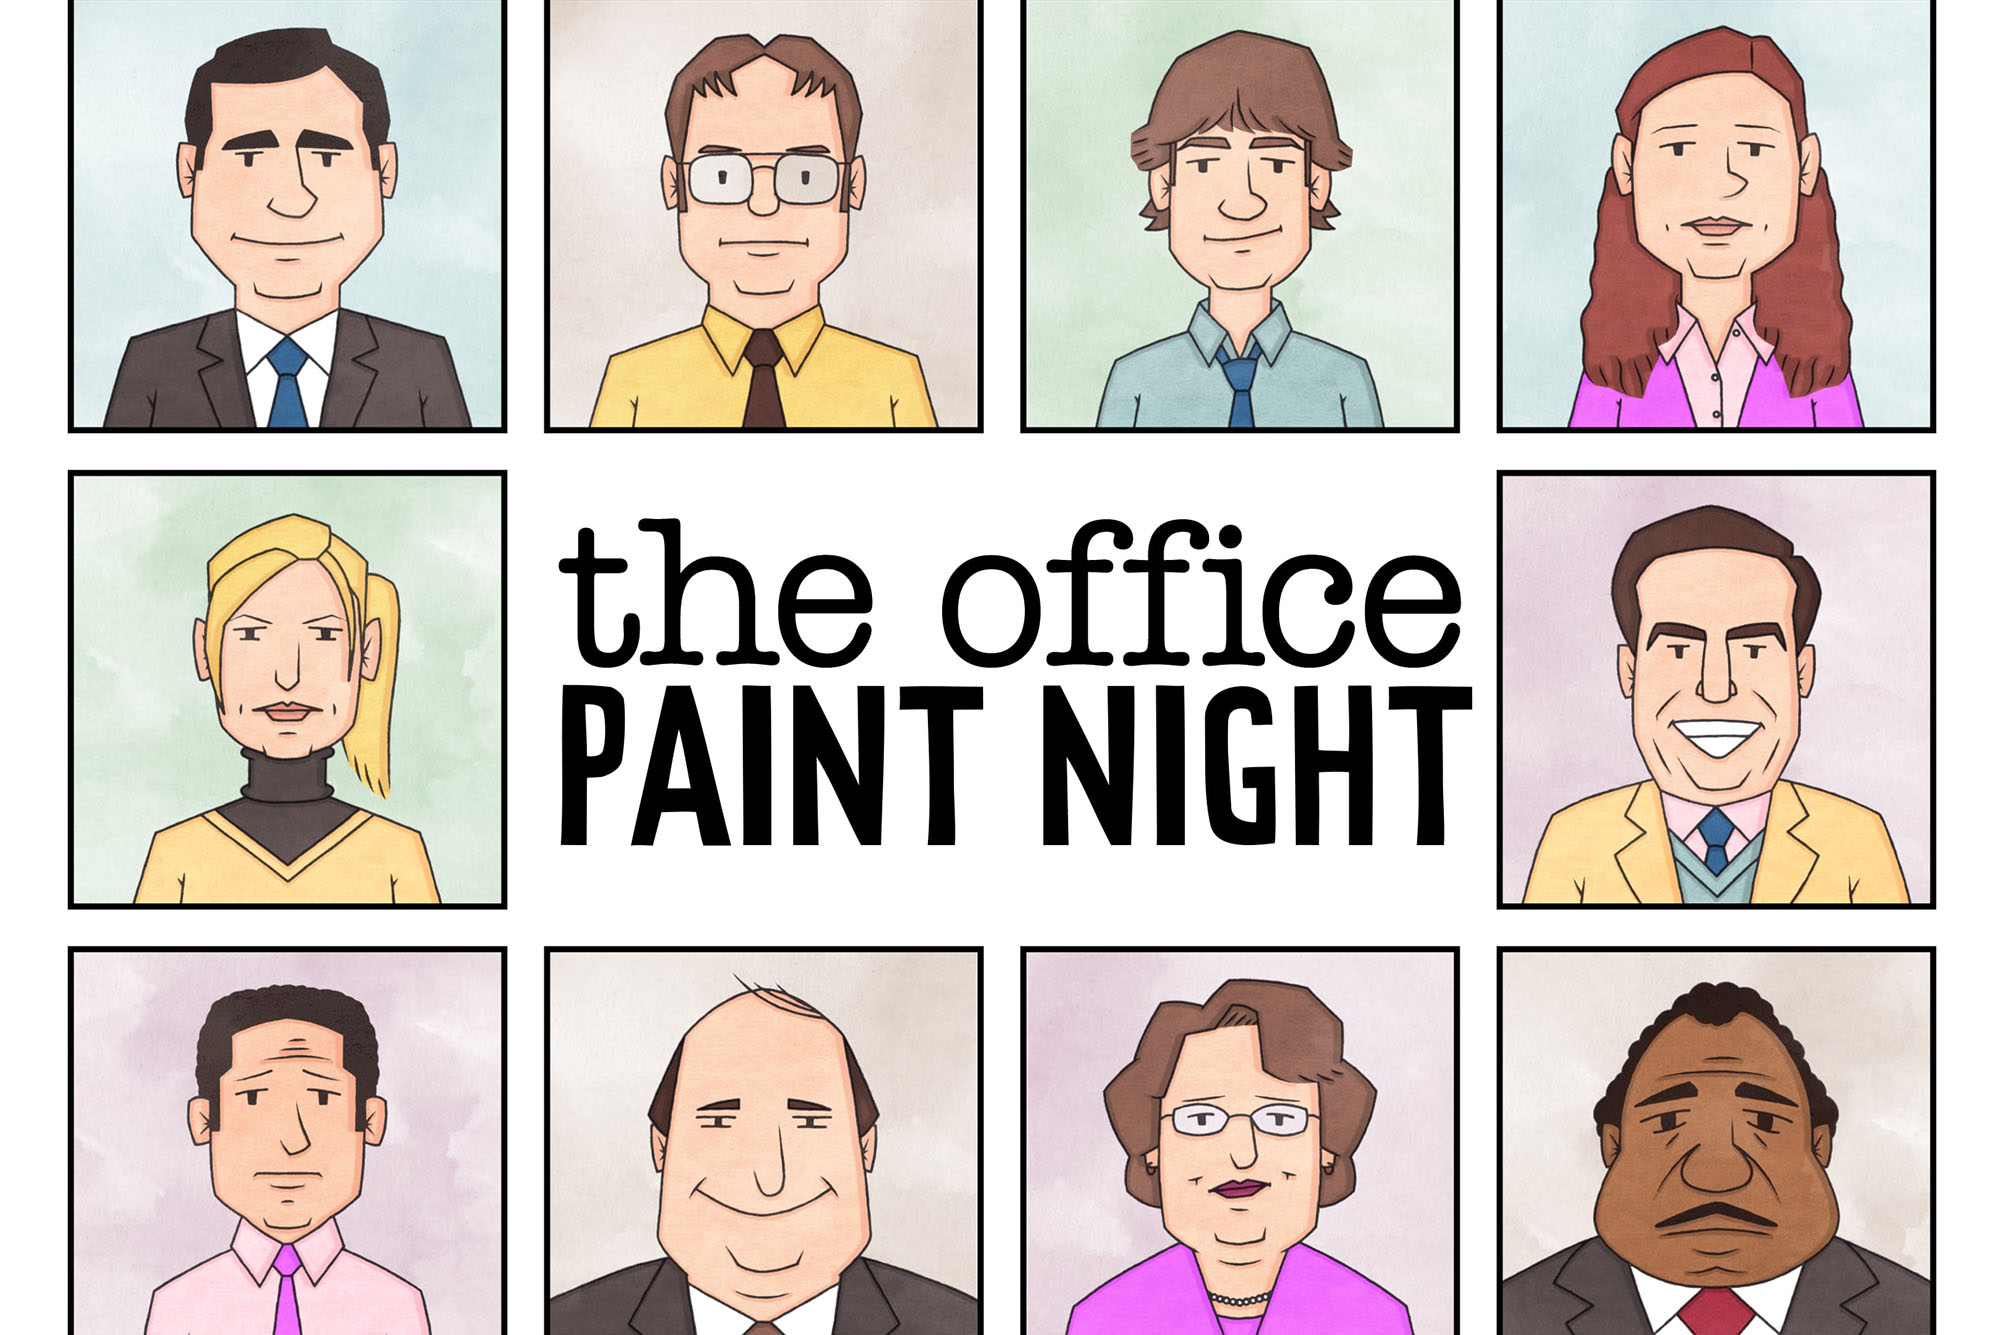 Photo: Drawings of characters from the TV show "The Office" in square frames. They are done in a cartoonish, colorful style. The center of the image has text that reads "The Office Paint Night"